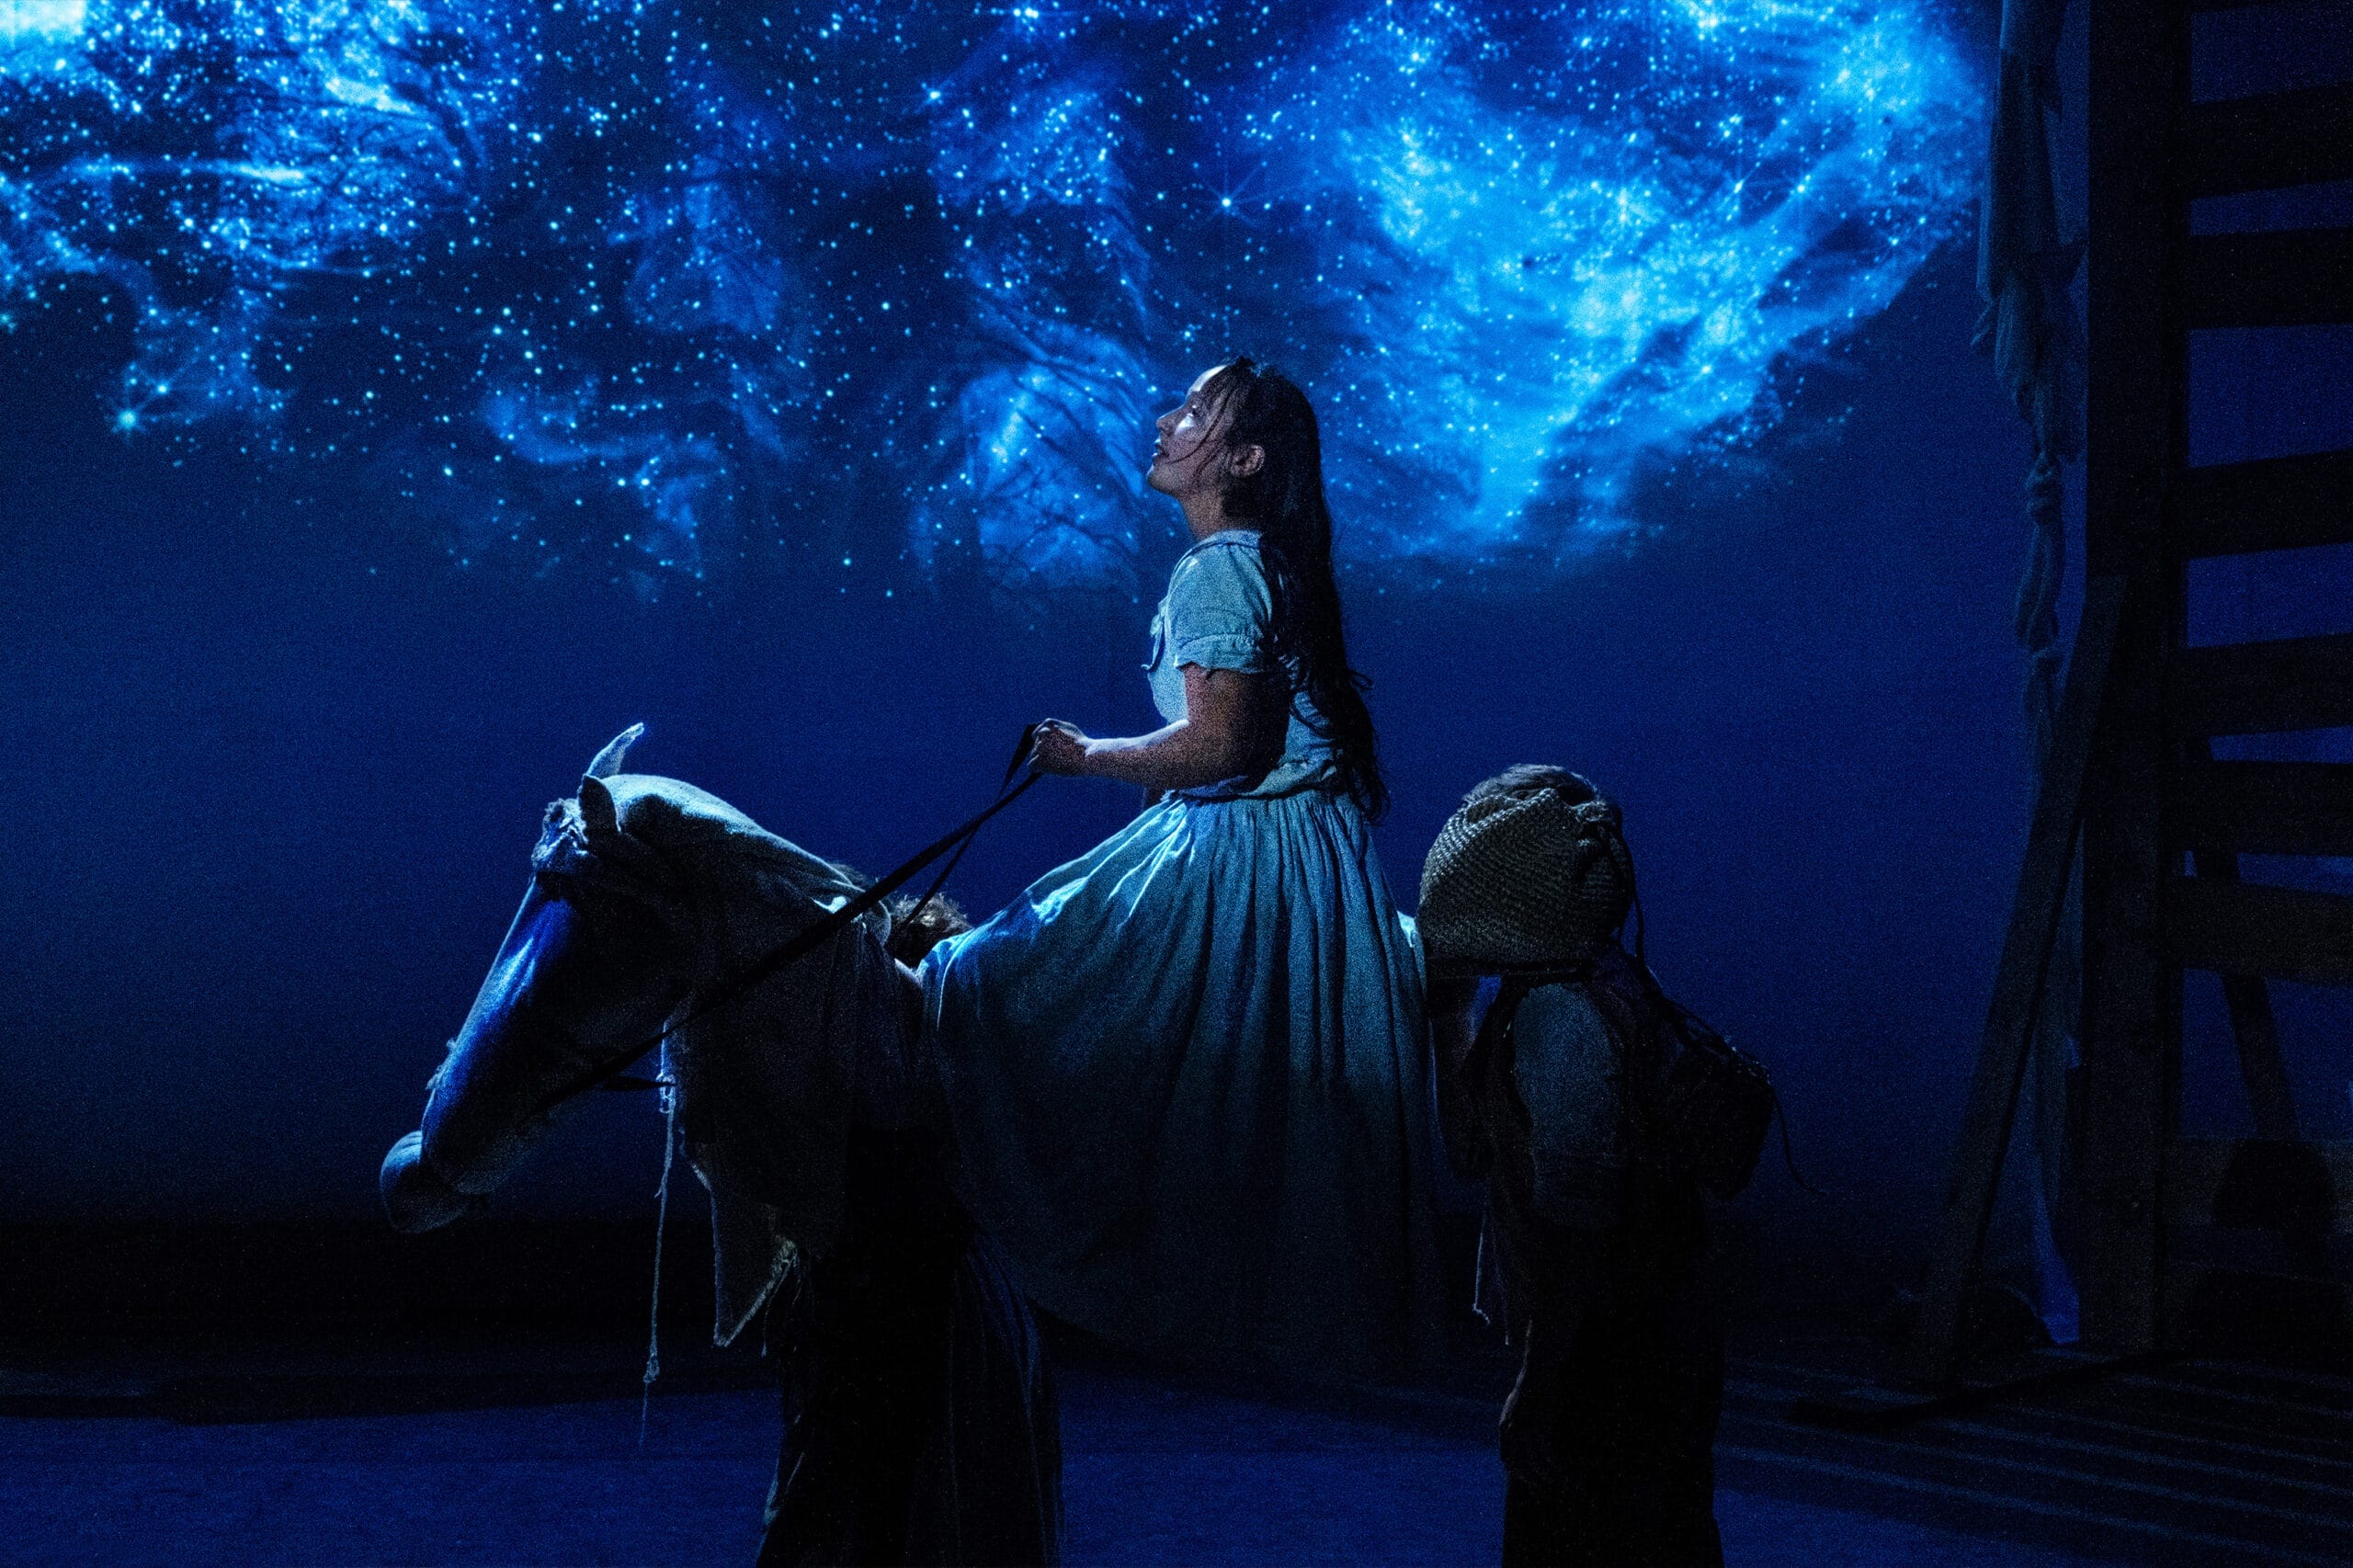 Tess is riding a horse -built from cloths and stage props. She is looking up at a mesmerising starry sky projection; dynamic blue lighting illuminates her face. She has long dark hair which falls down her back.